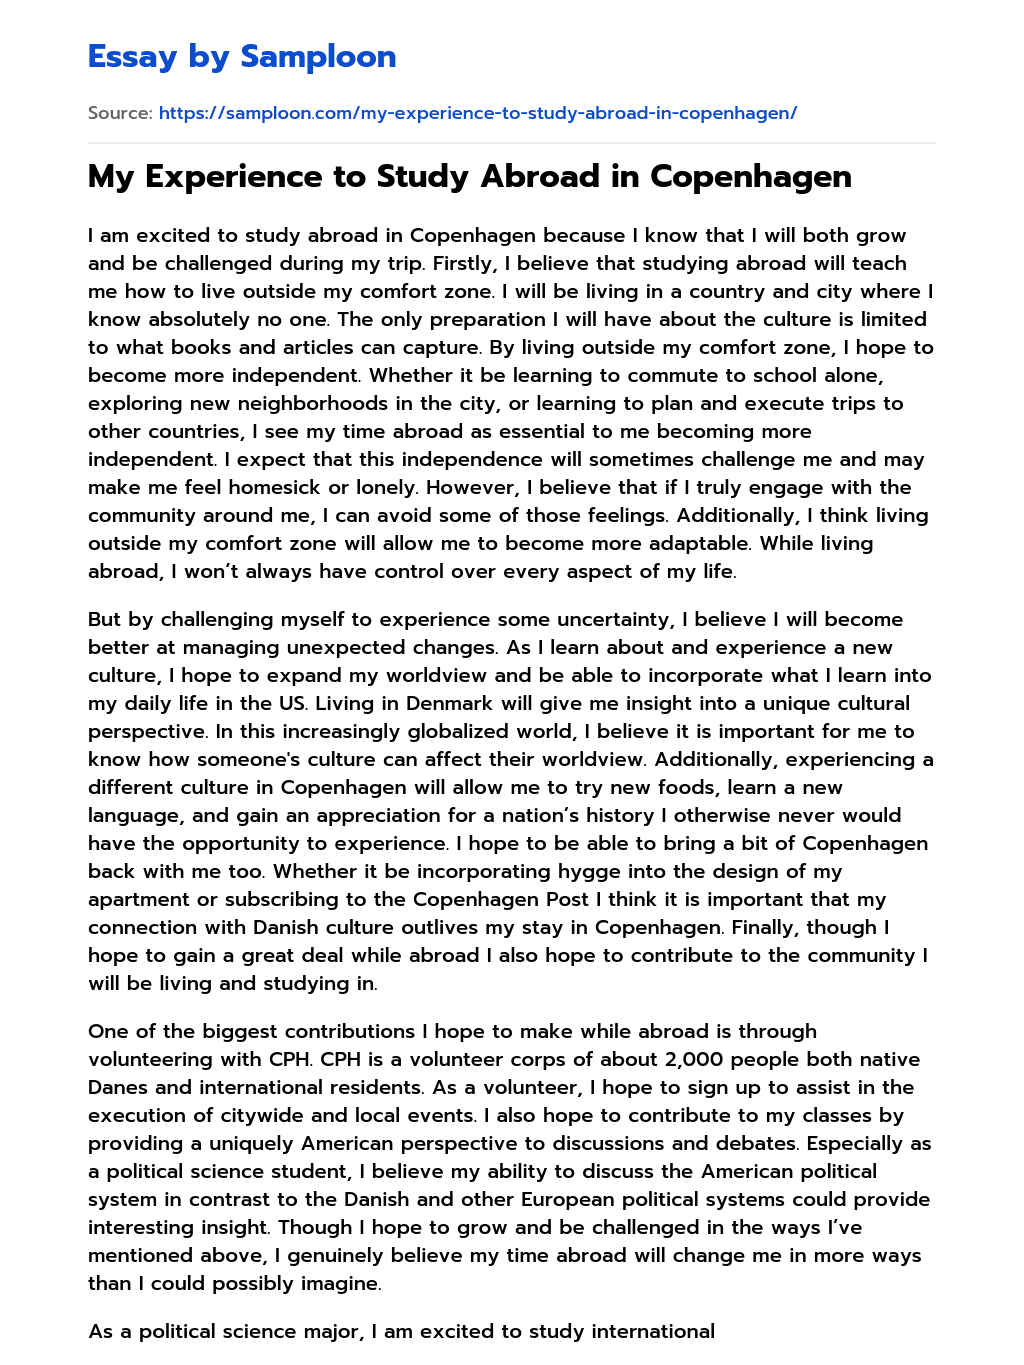 My Experience to Study Abroad in Copenhagen Application essay